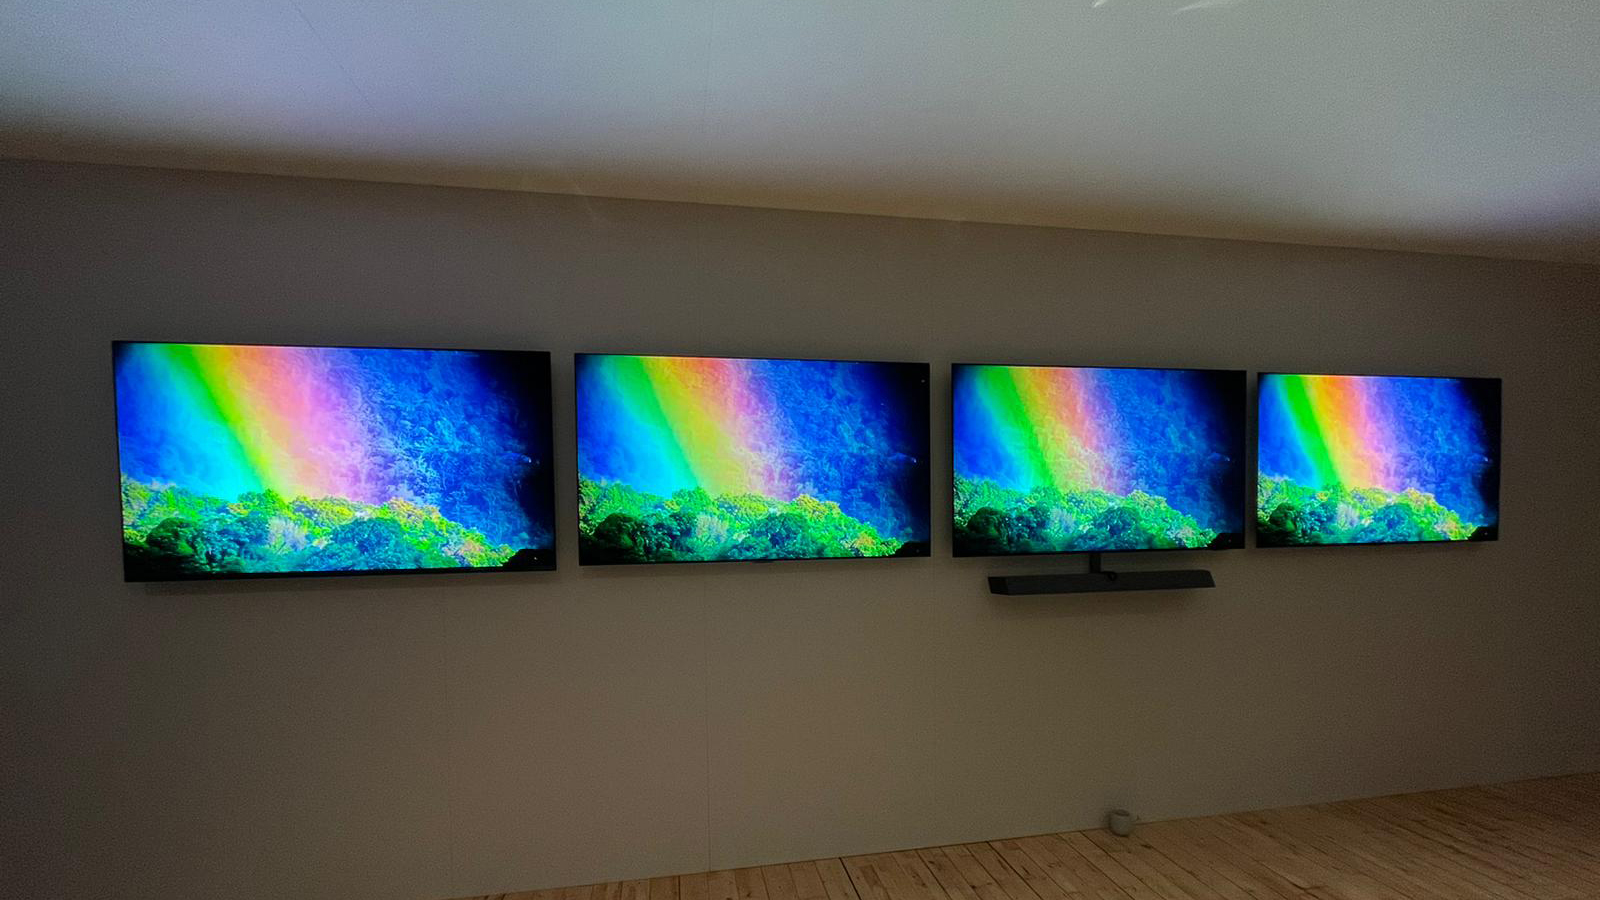 Philips OLED TV with three other OLED TVs on the wall